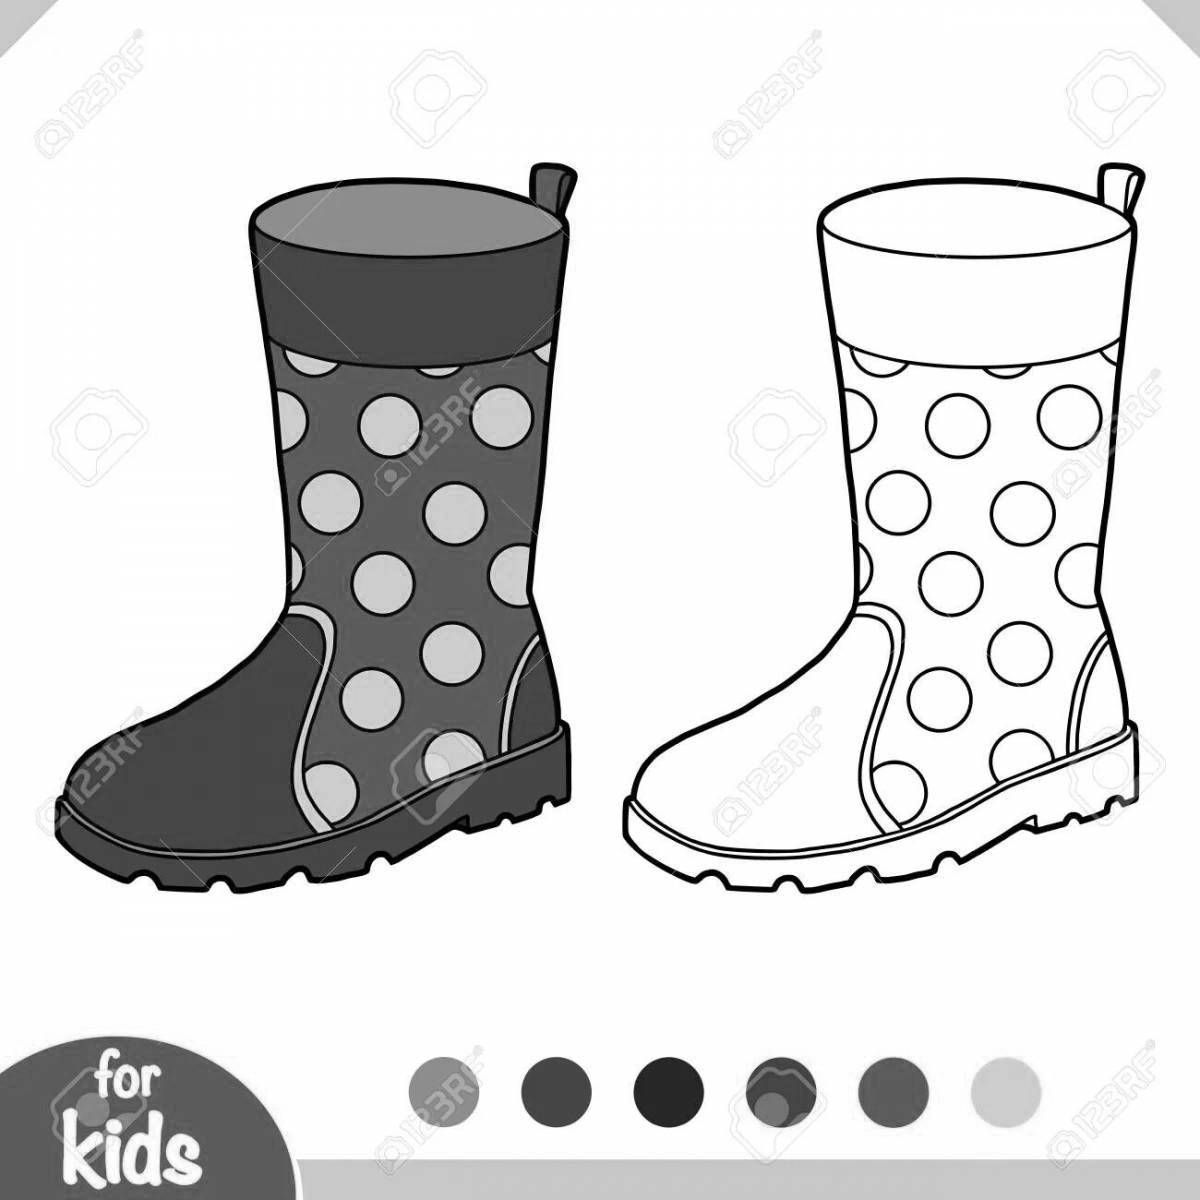 Coloring page fashionable rubber boots